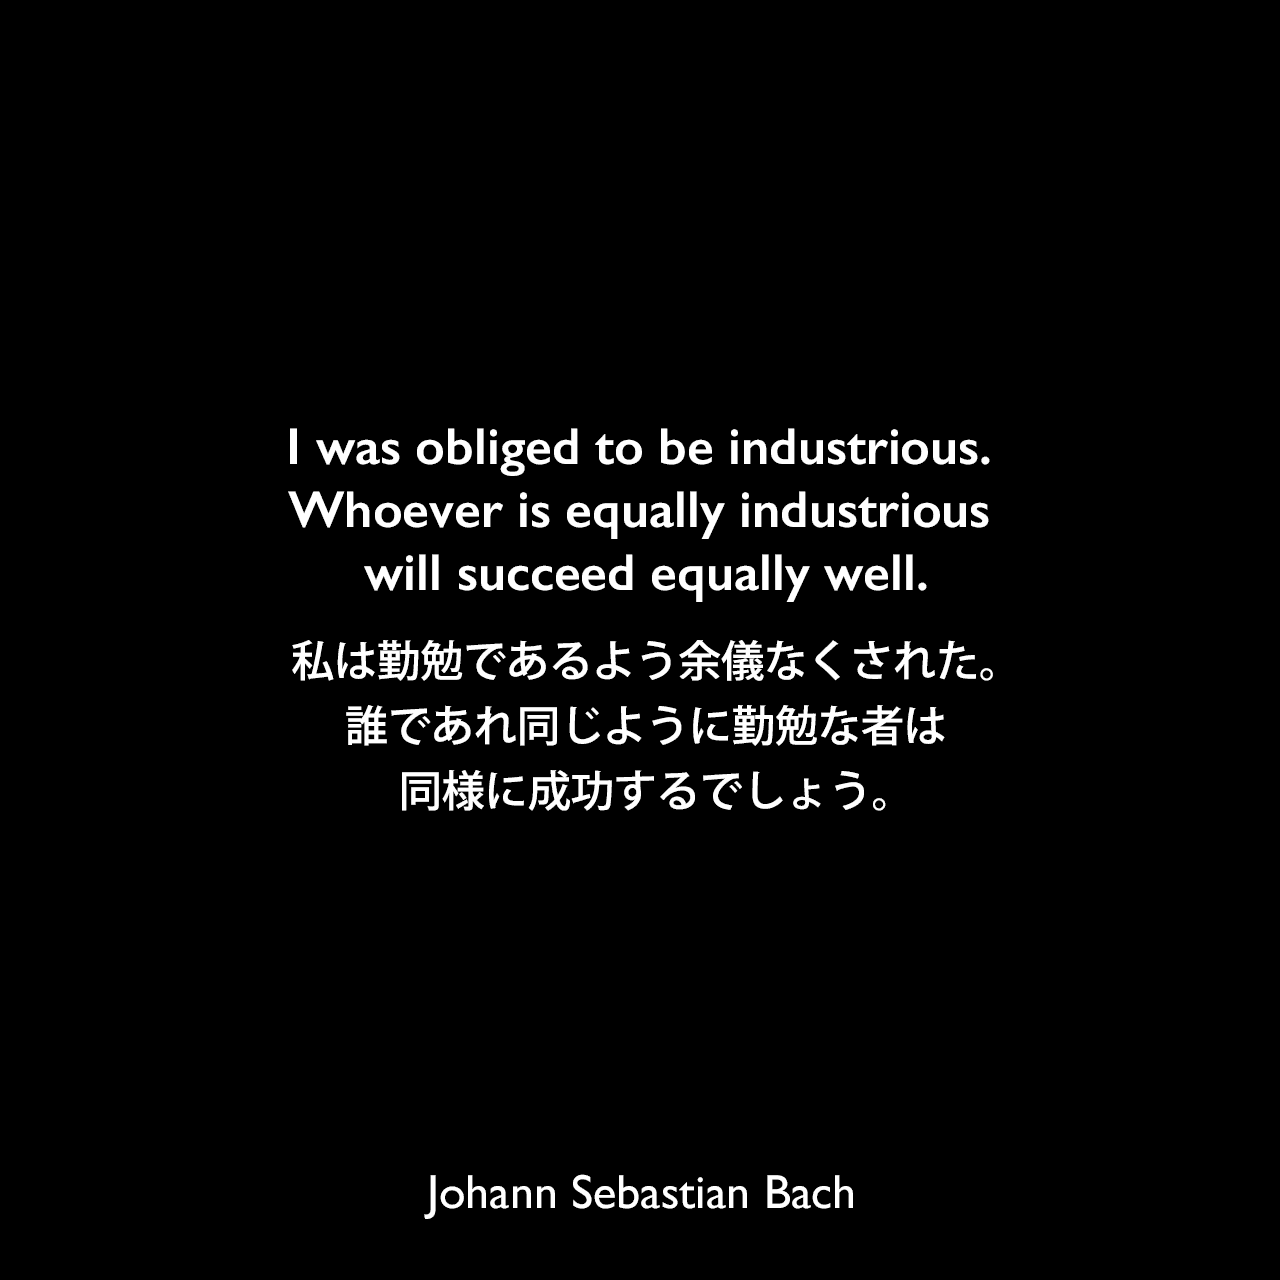 I was obliged to be industrious. Whoever is equally industrious will succeed equally well.私は勤勉であるよう余儀なくされた。誰であれ同じように勤勉な者は同様に成功するでしょう。Johann Sebastian Bach